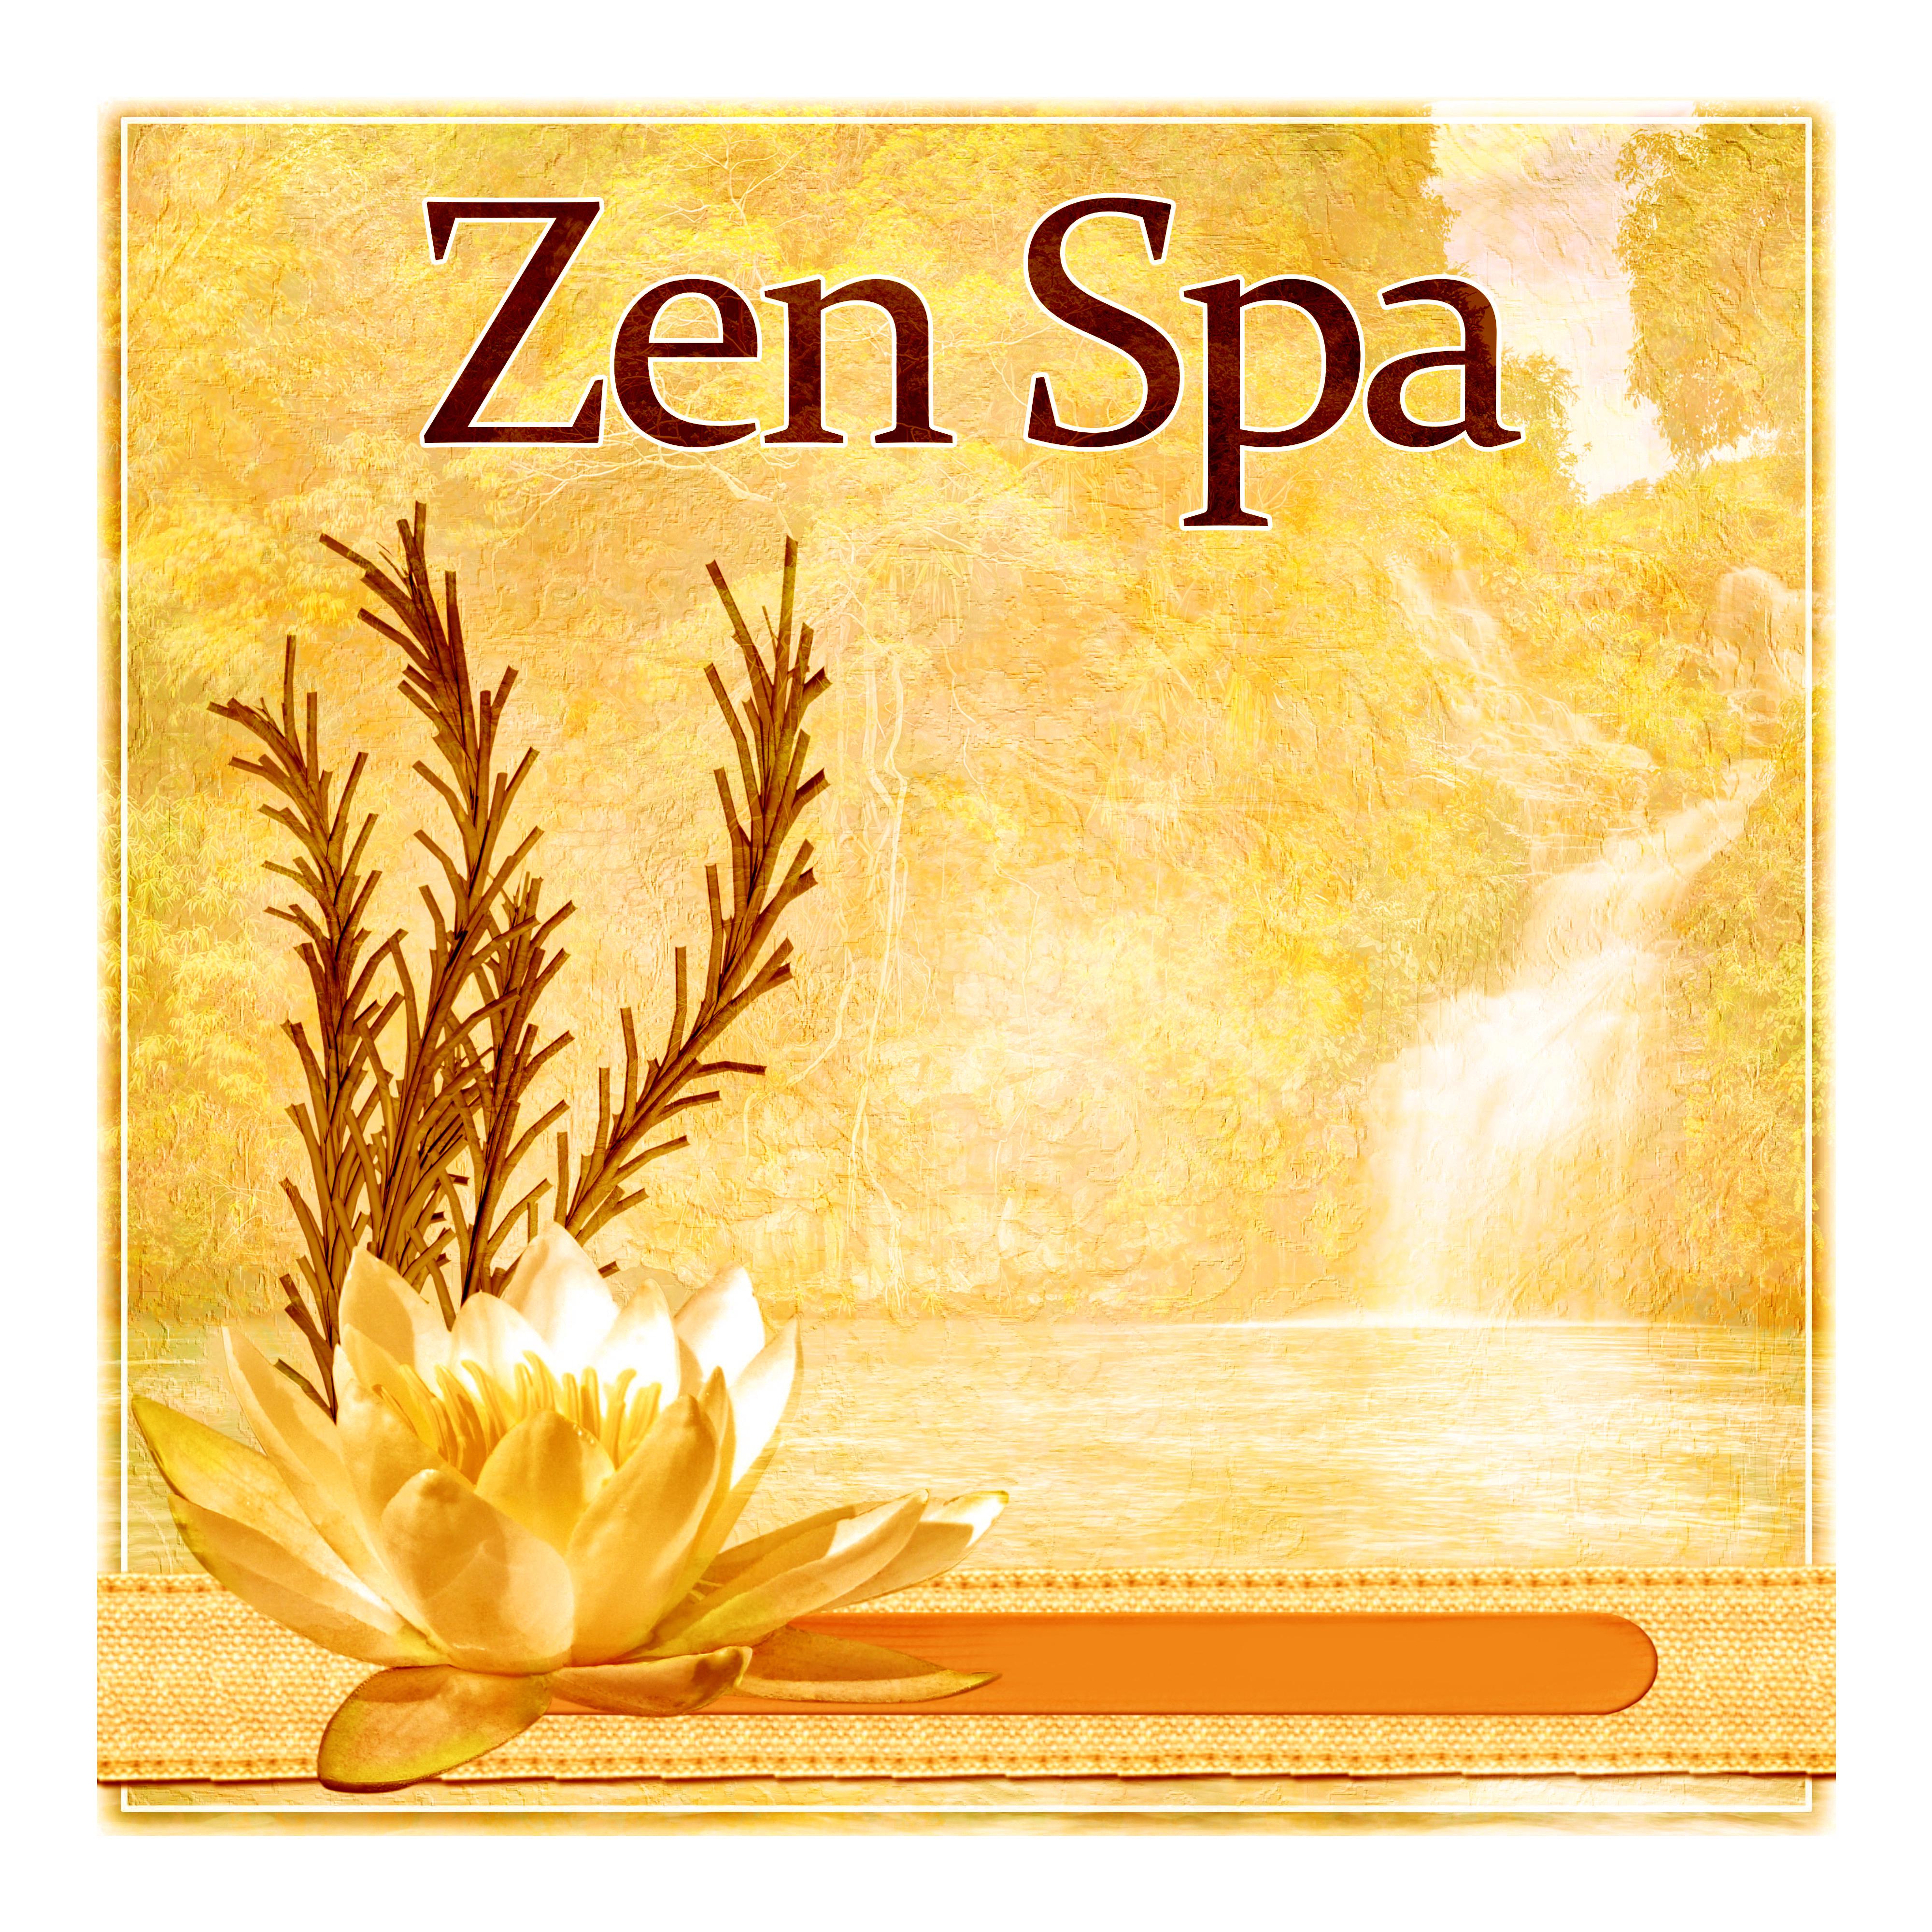 Zen Spa  Relaxing Moment, Nature Sounds for Massage Therapy, Sensual Massage Music for Aromatherapy, Tranquility Spa